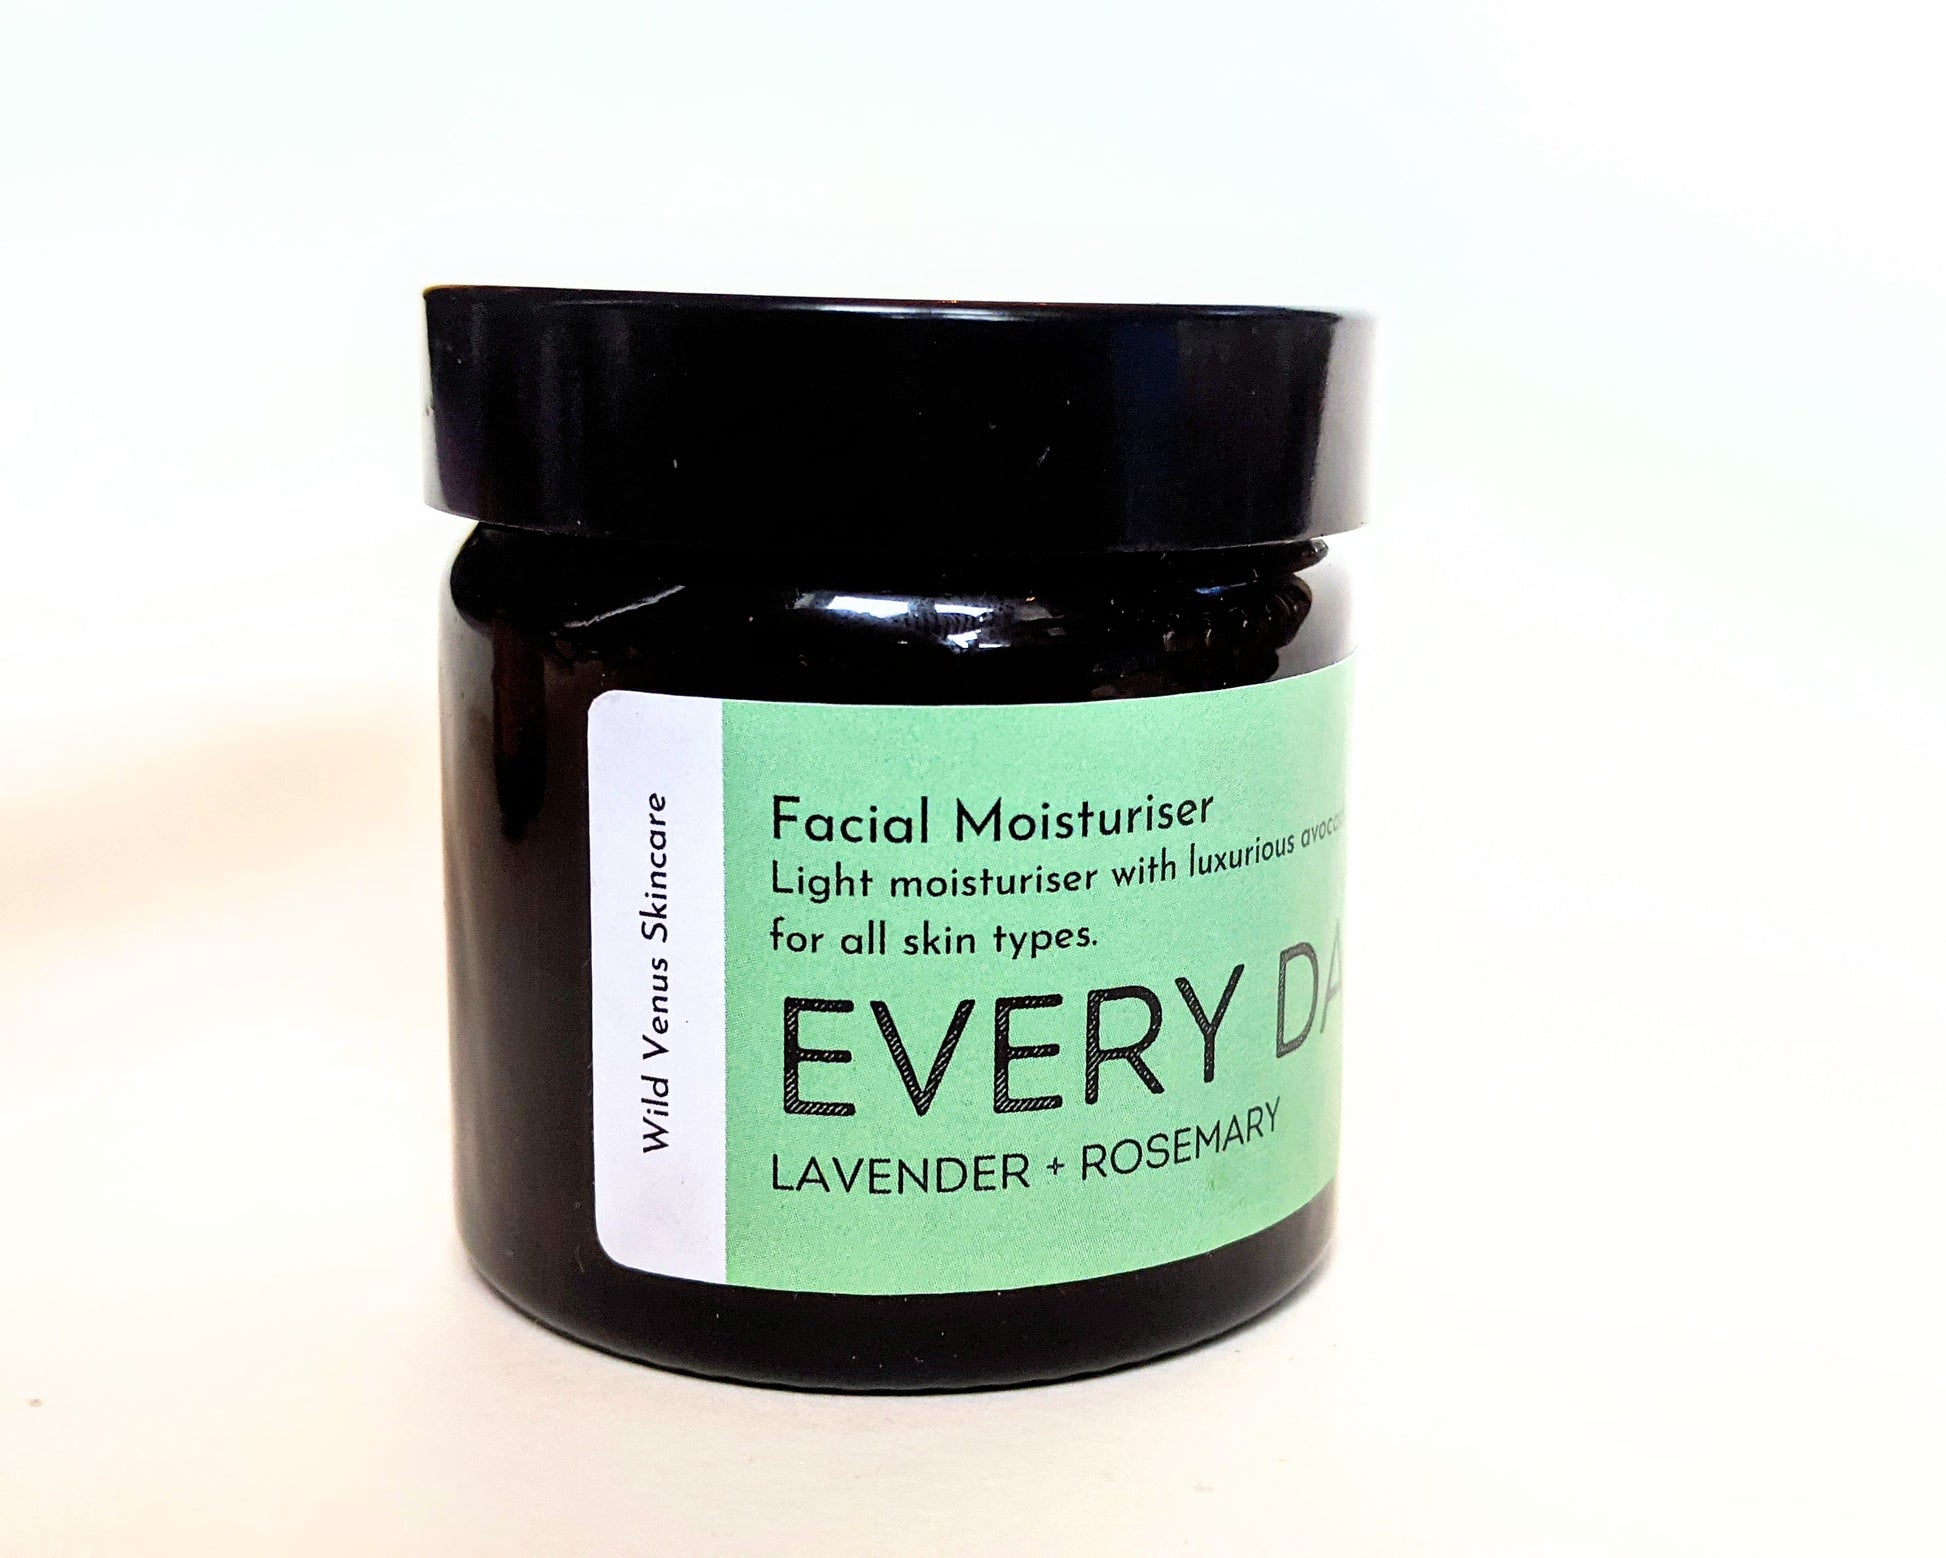 A closed jar of the EVERY DAY facial moisturiser, shown from a side angle. 